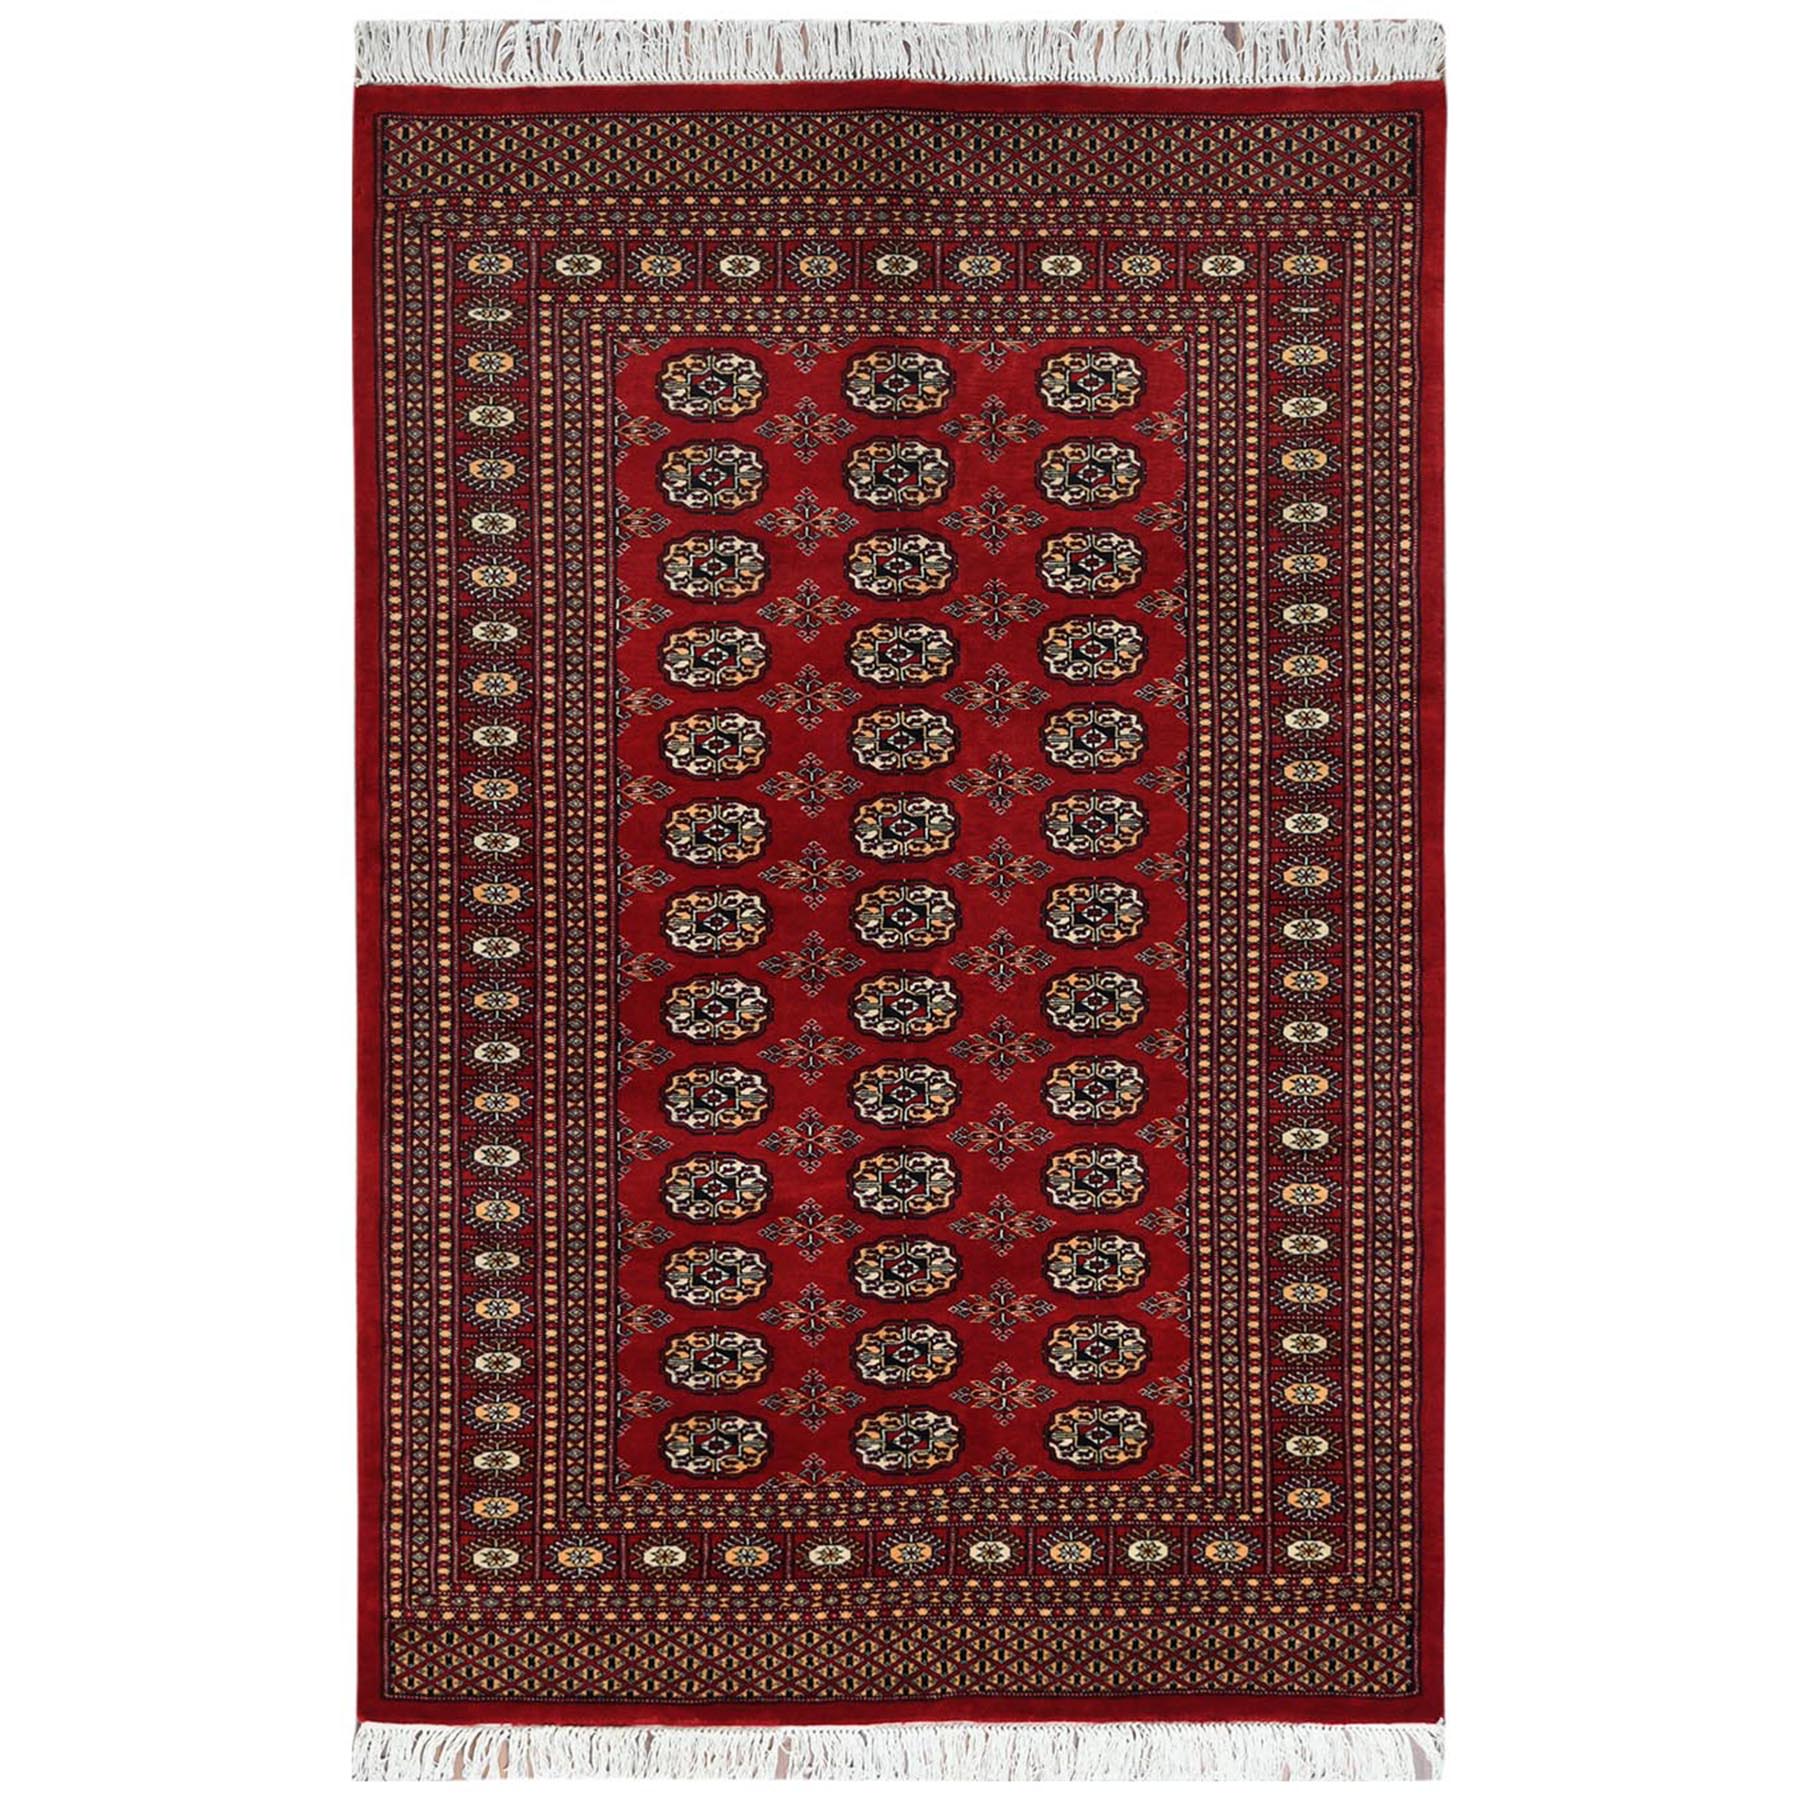 Nomadic And Village Collection Hand Knotted Red Rug No: 1122736